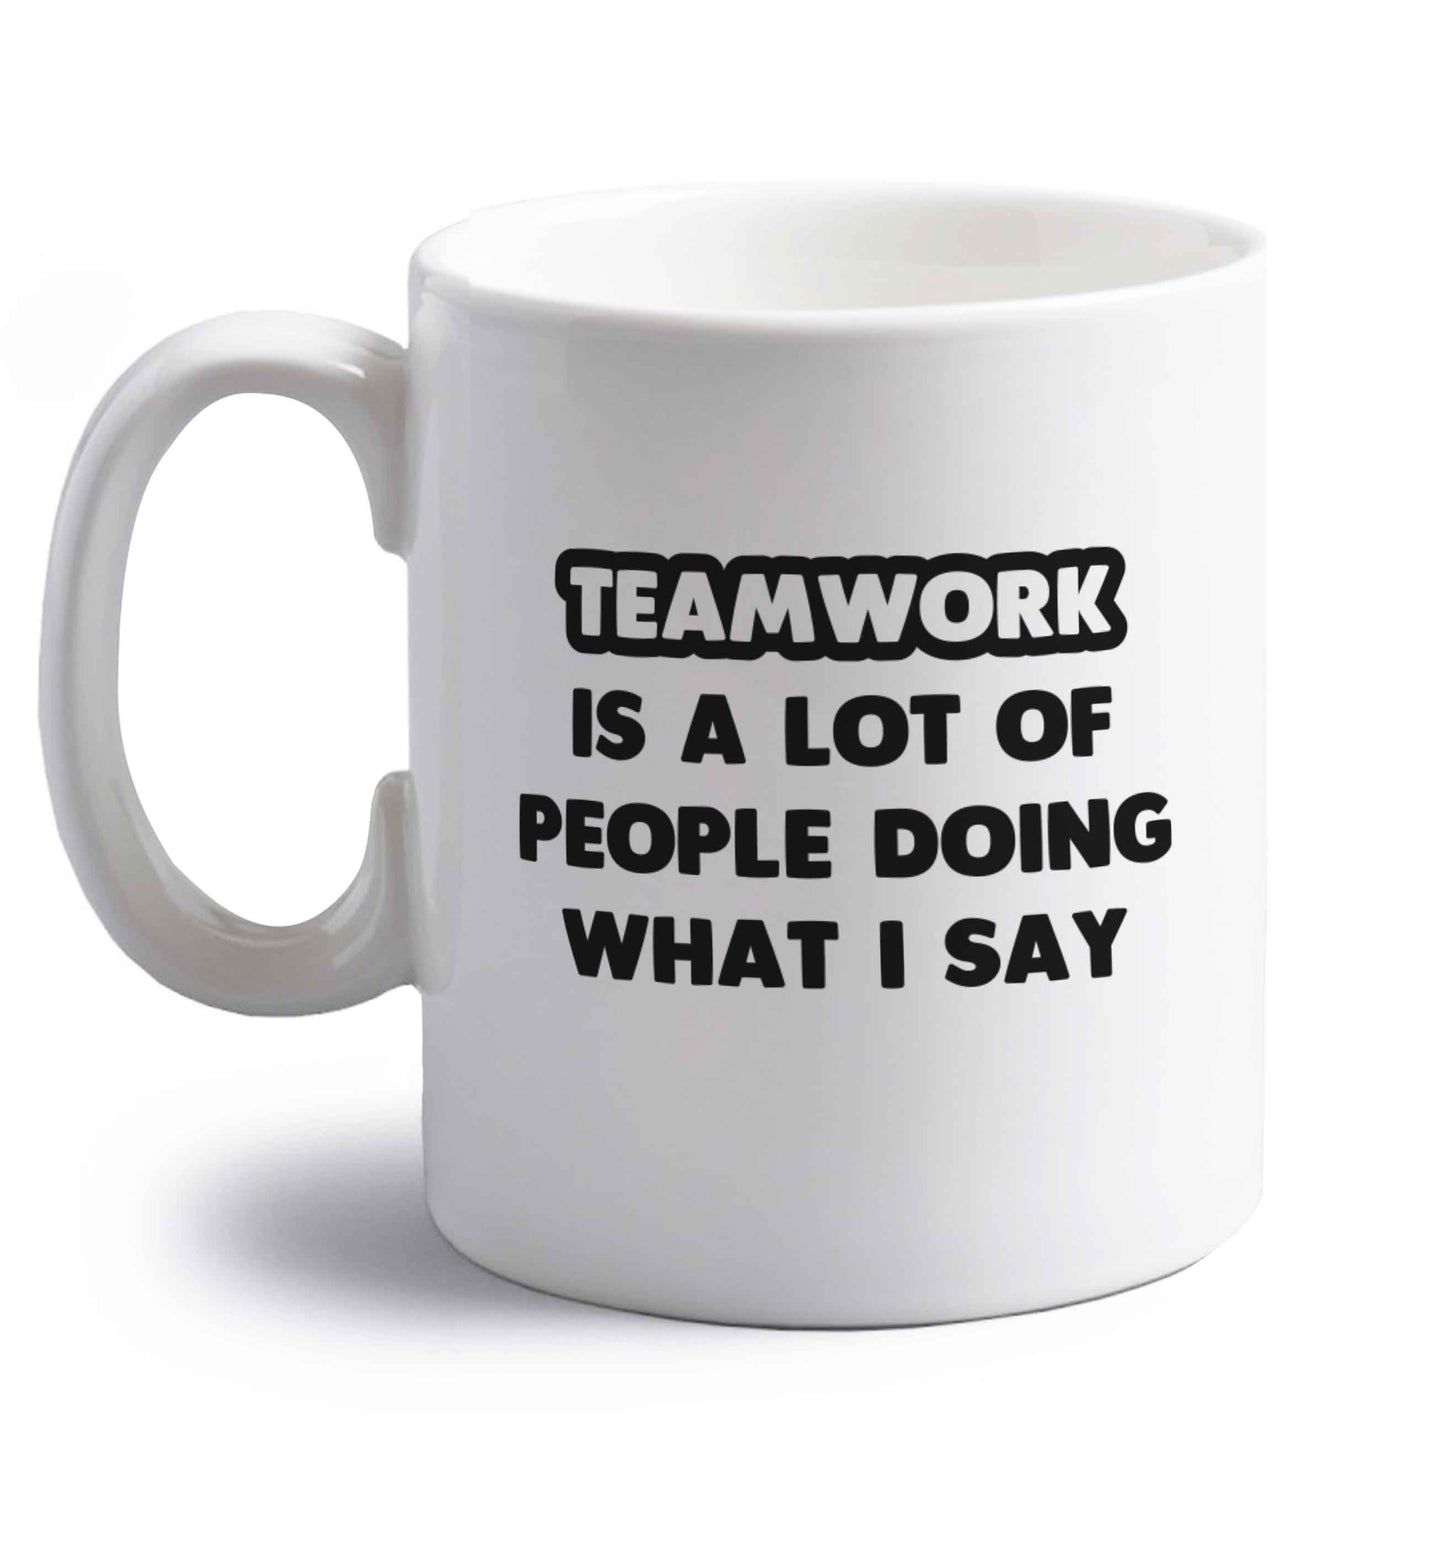 Teamwork is a lot of people doing what I say right handed white ceramic mug 